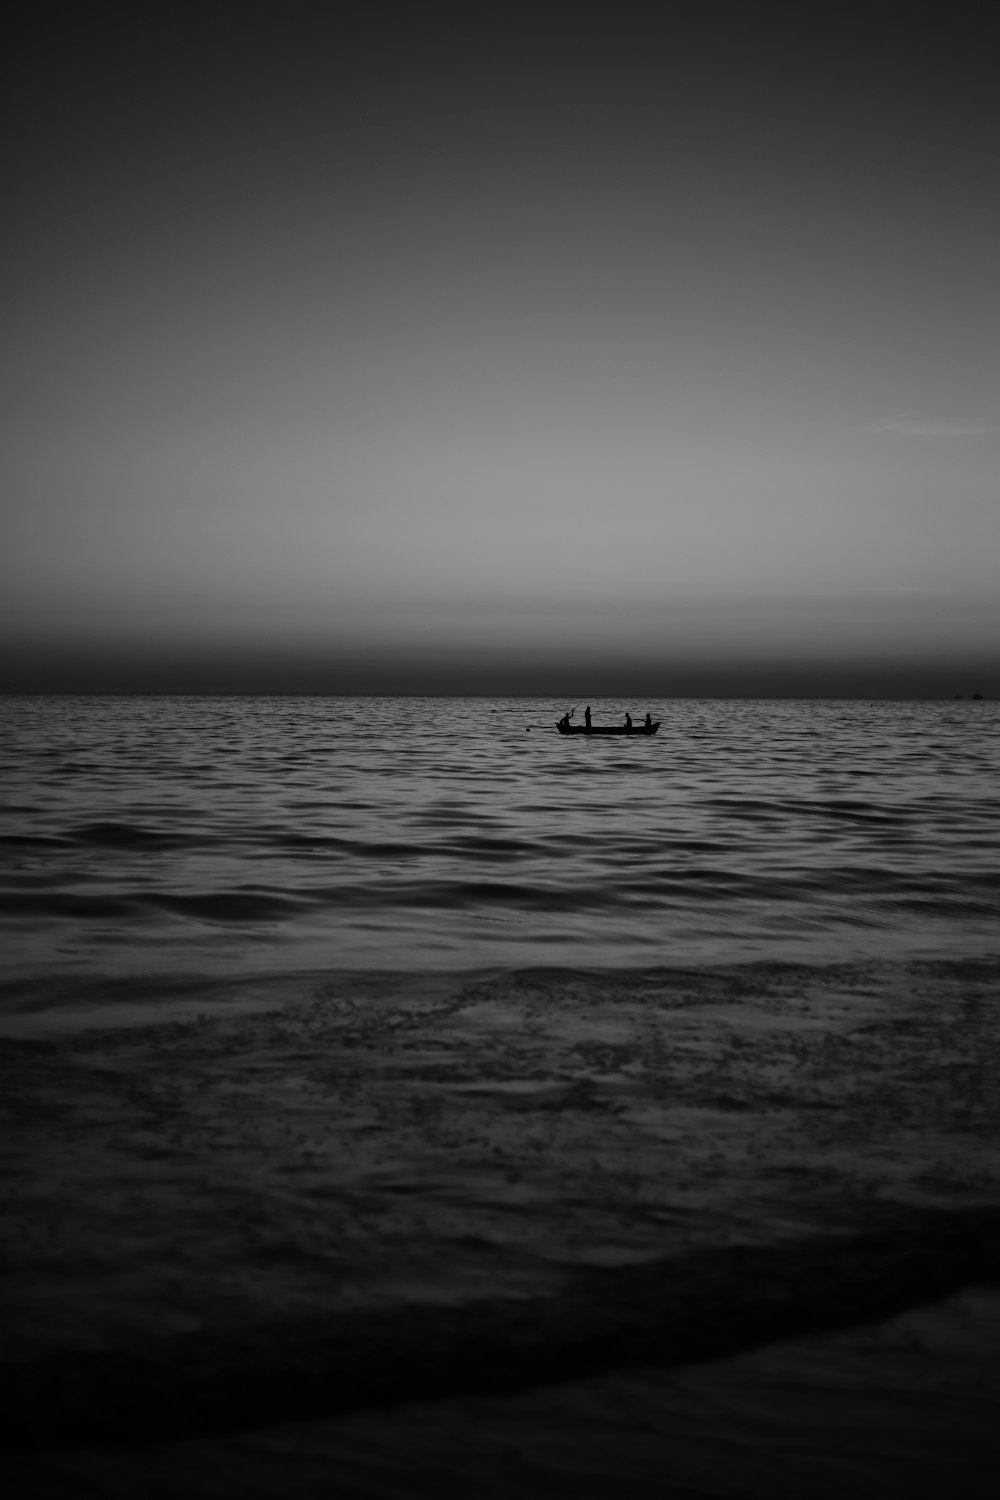 grayscale photo of person riding on boat on sea